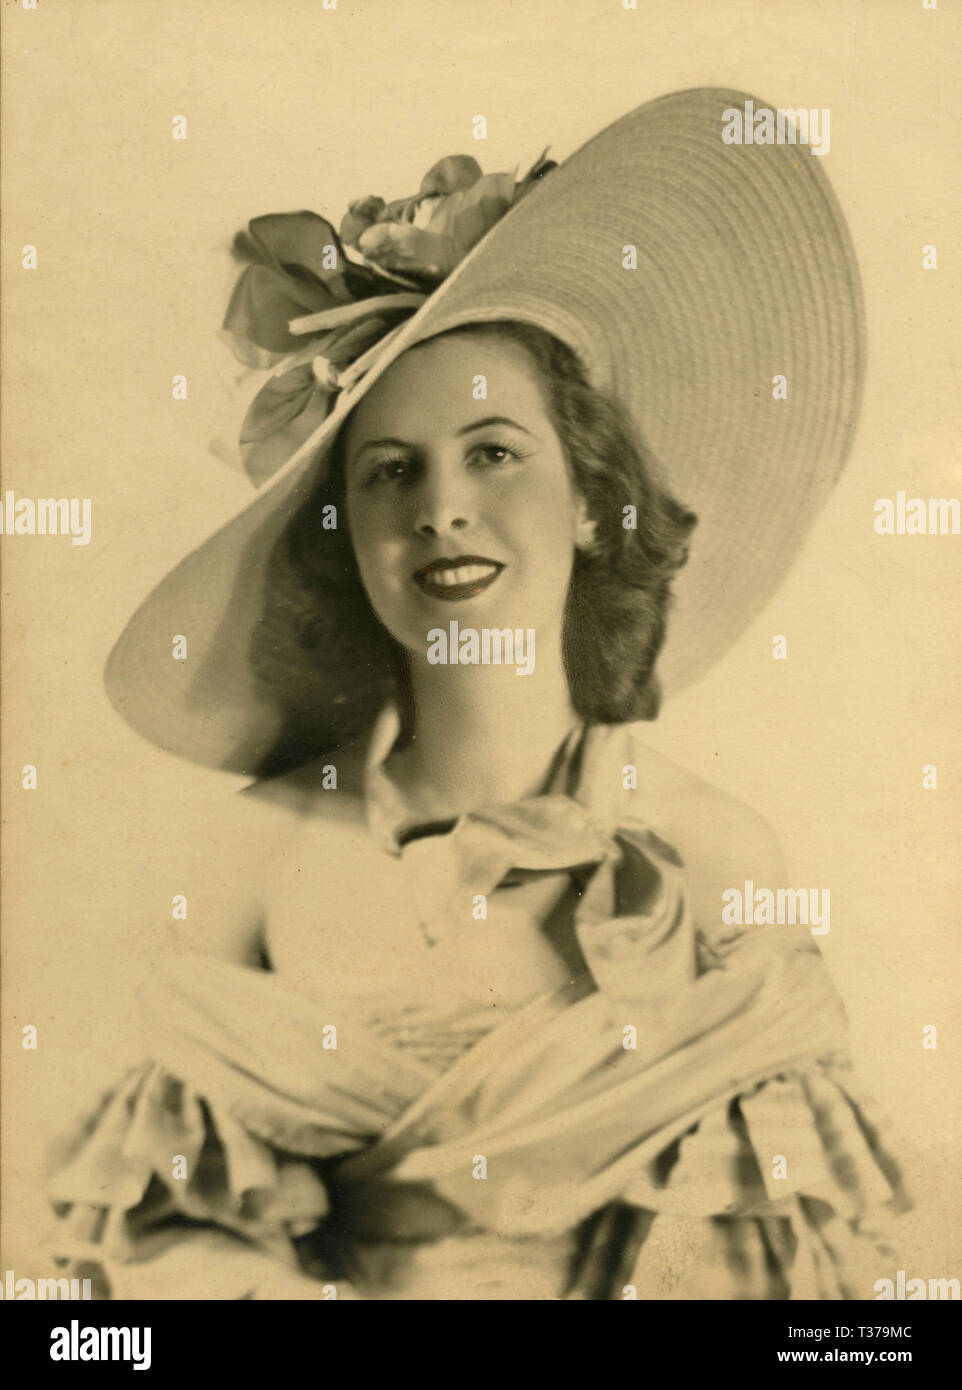 Portrait of actress Ruby Dalma with large hat, Italy 1940s Stock Photo